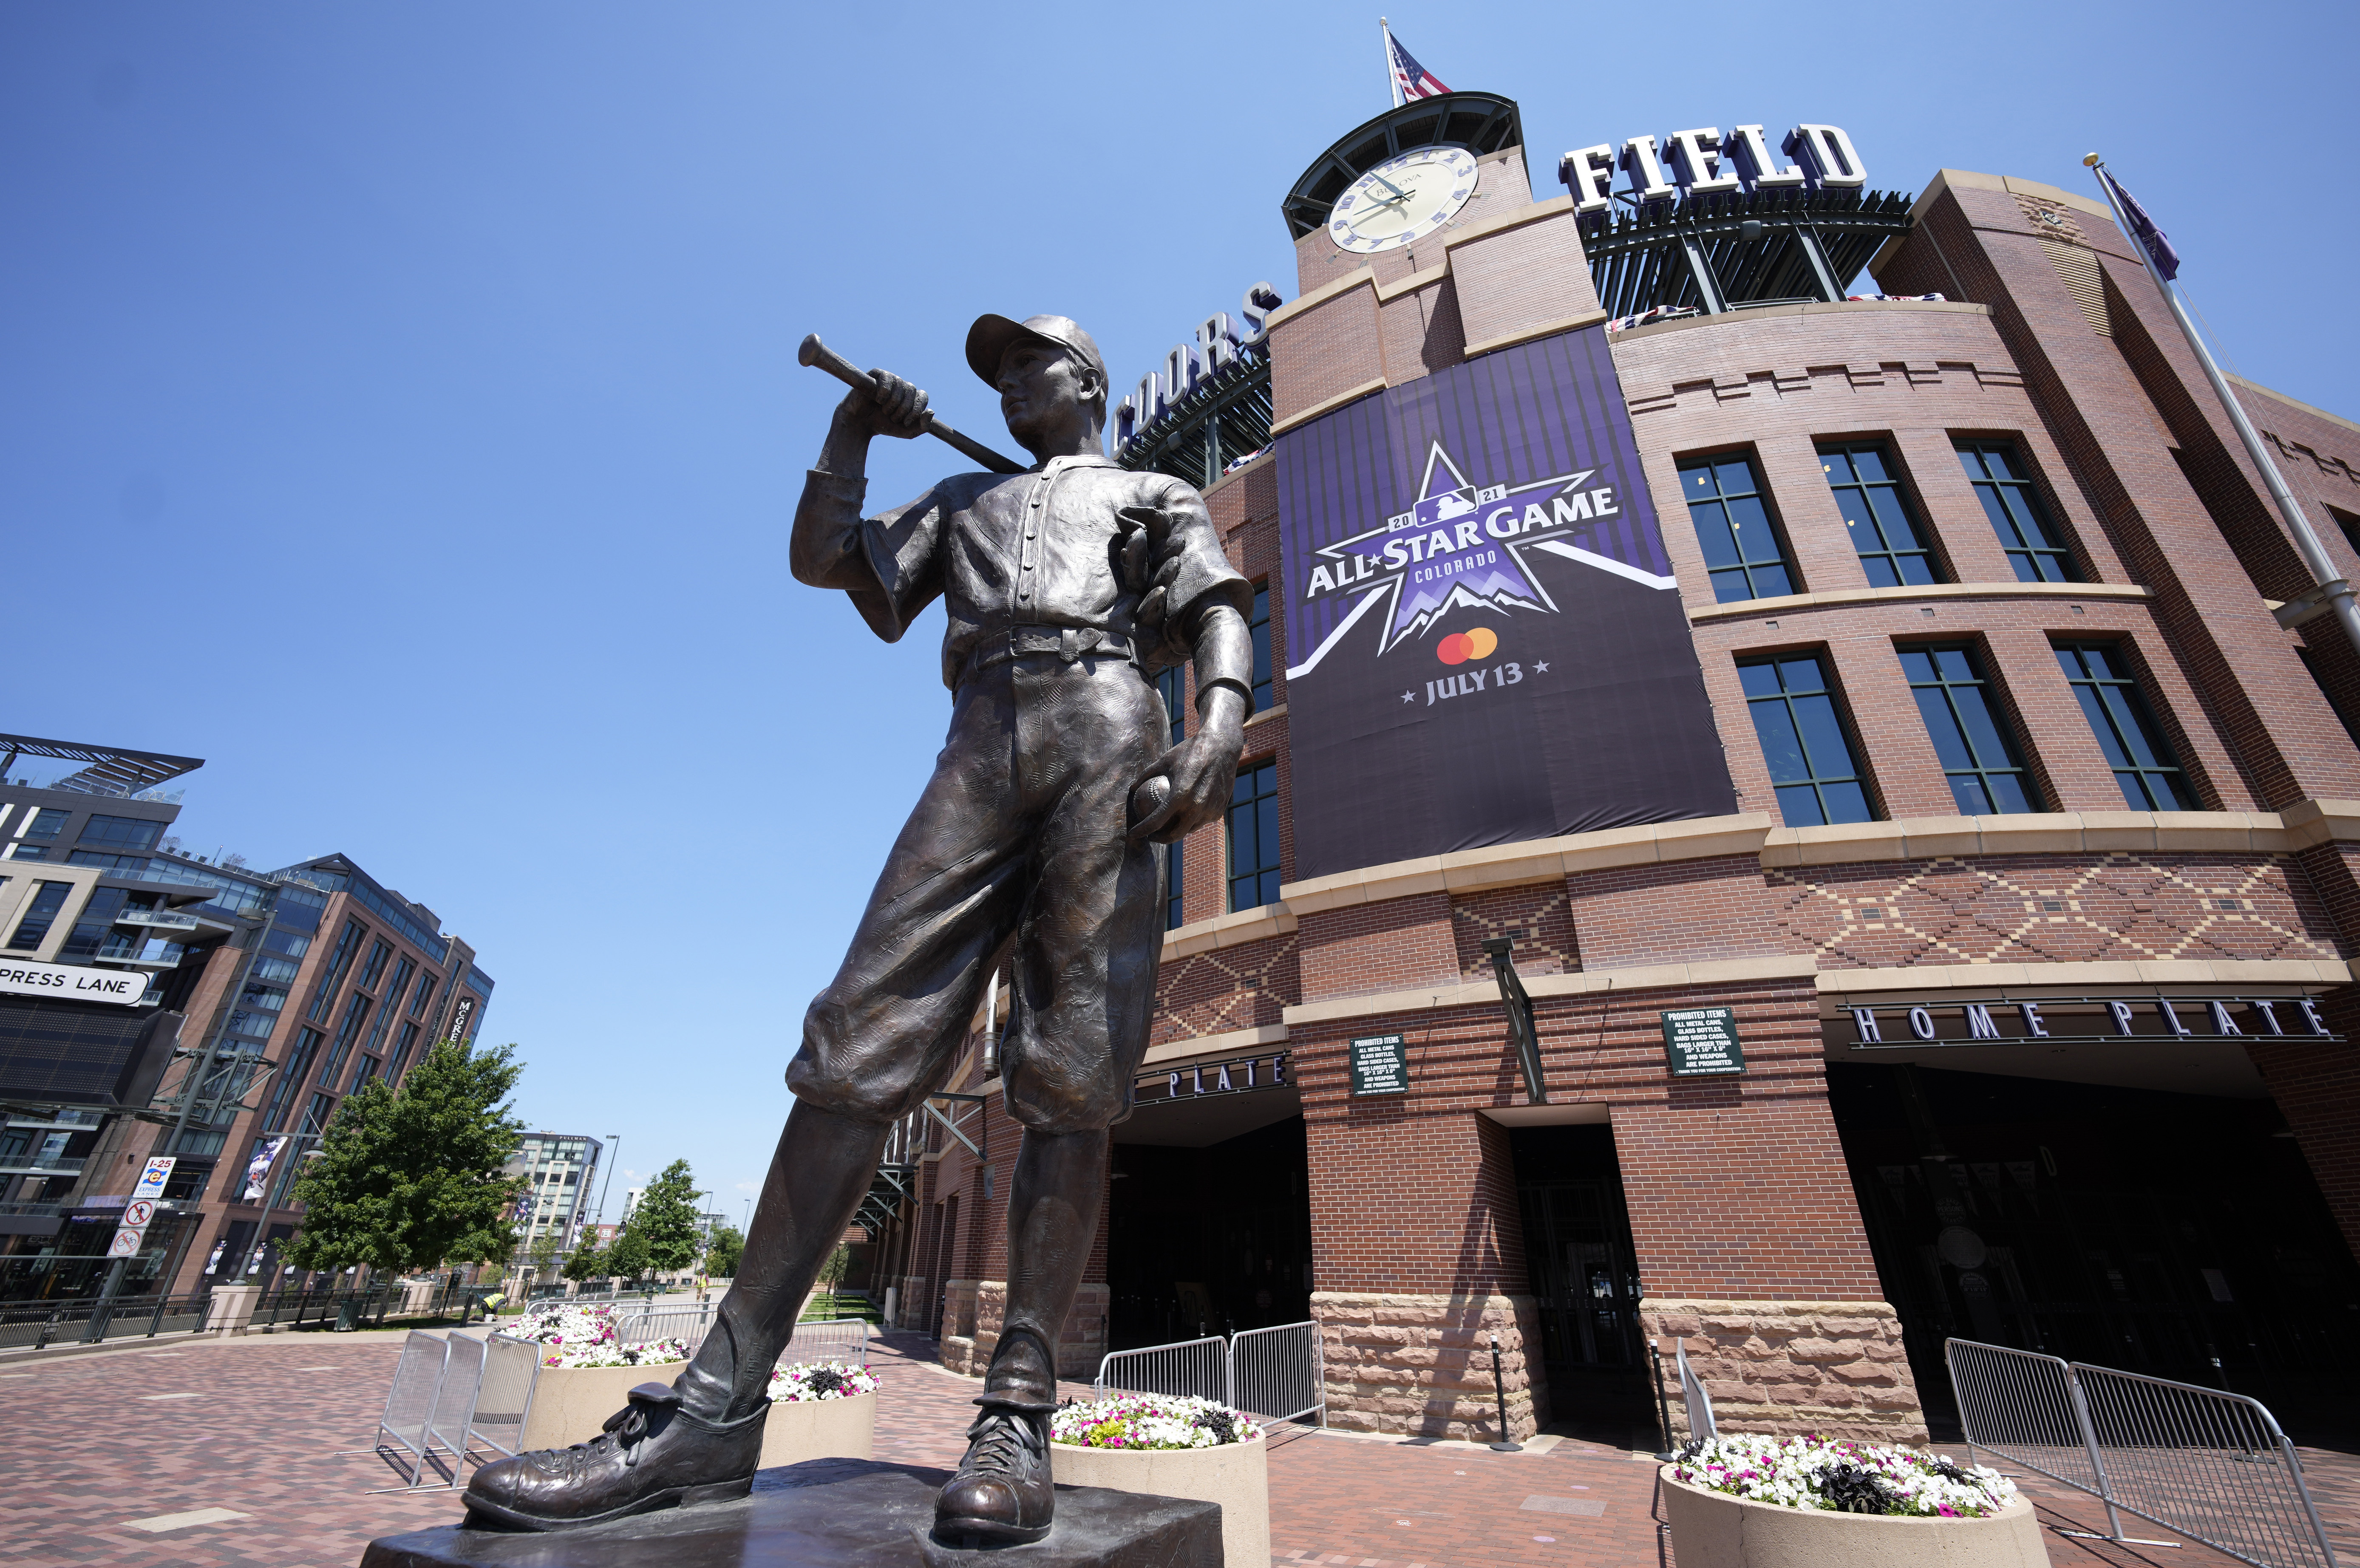 Shohei Ohtani announces participation in 2021 Home Run Derby at Coors Field